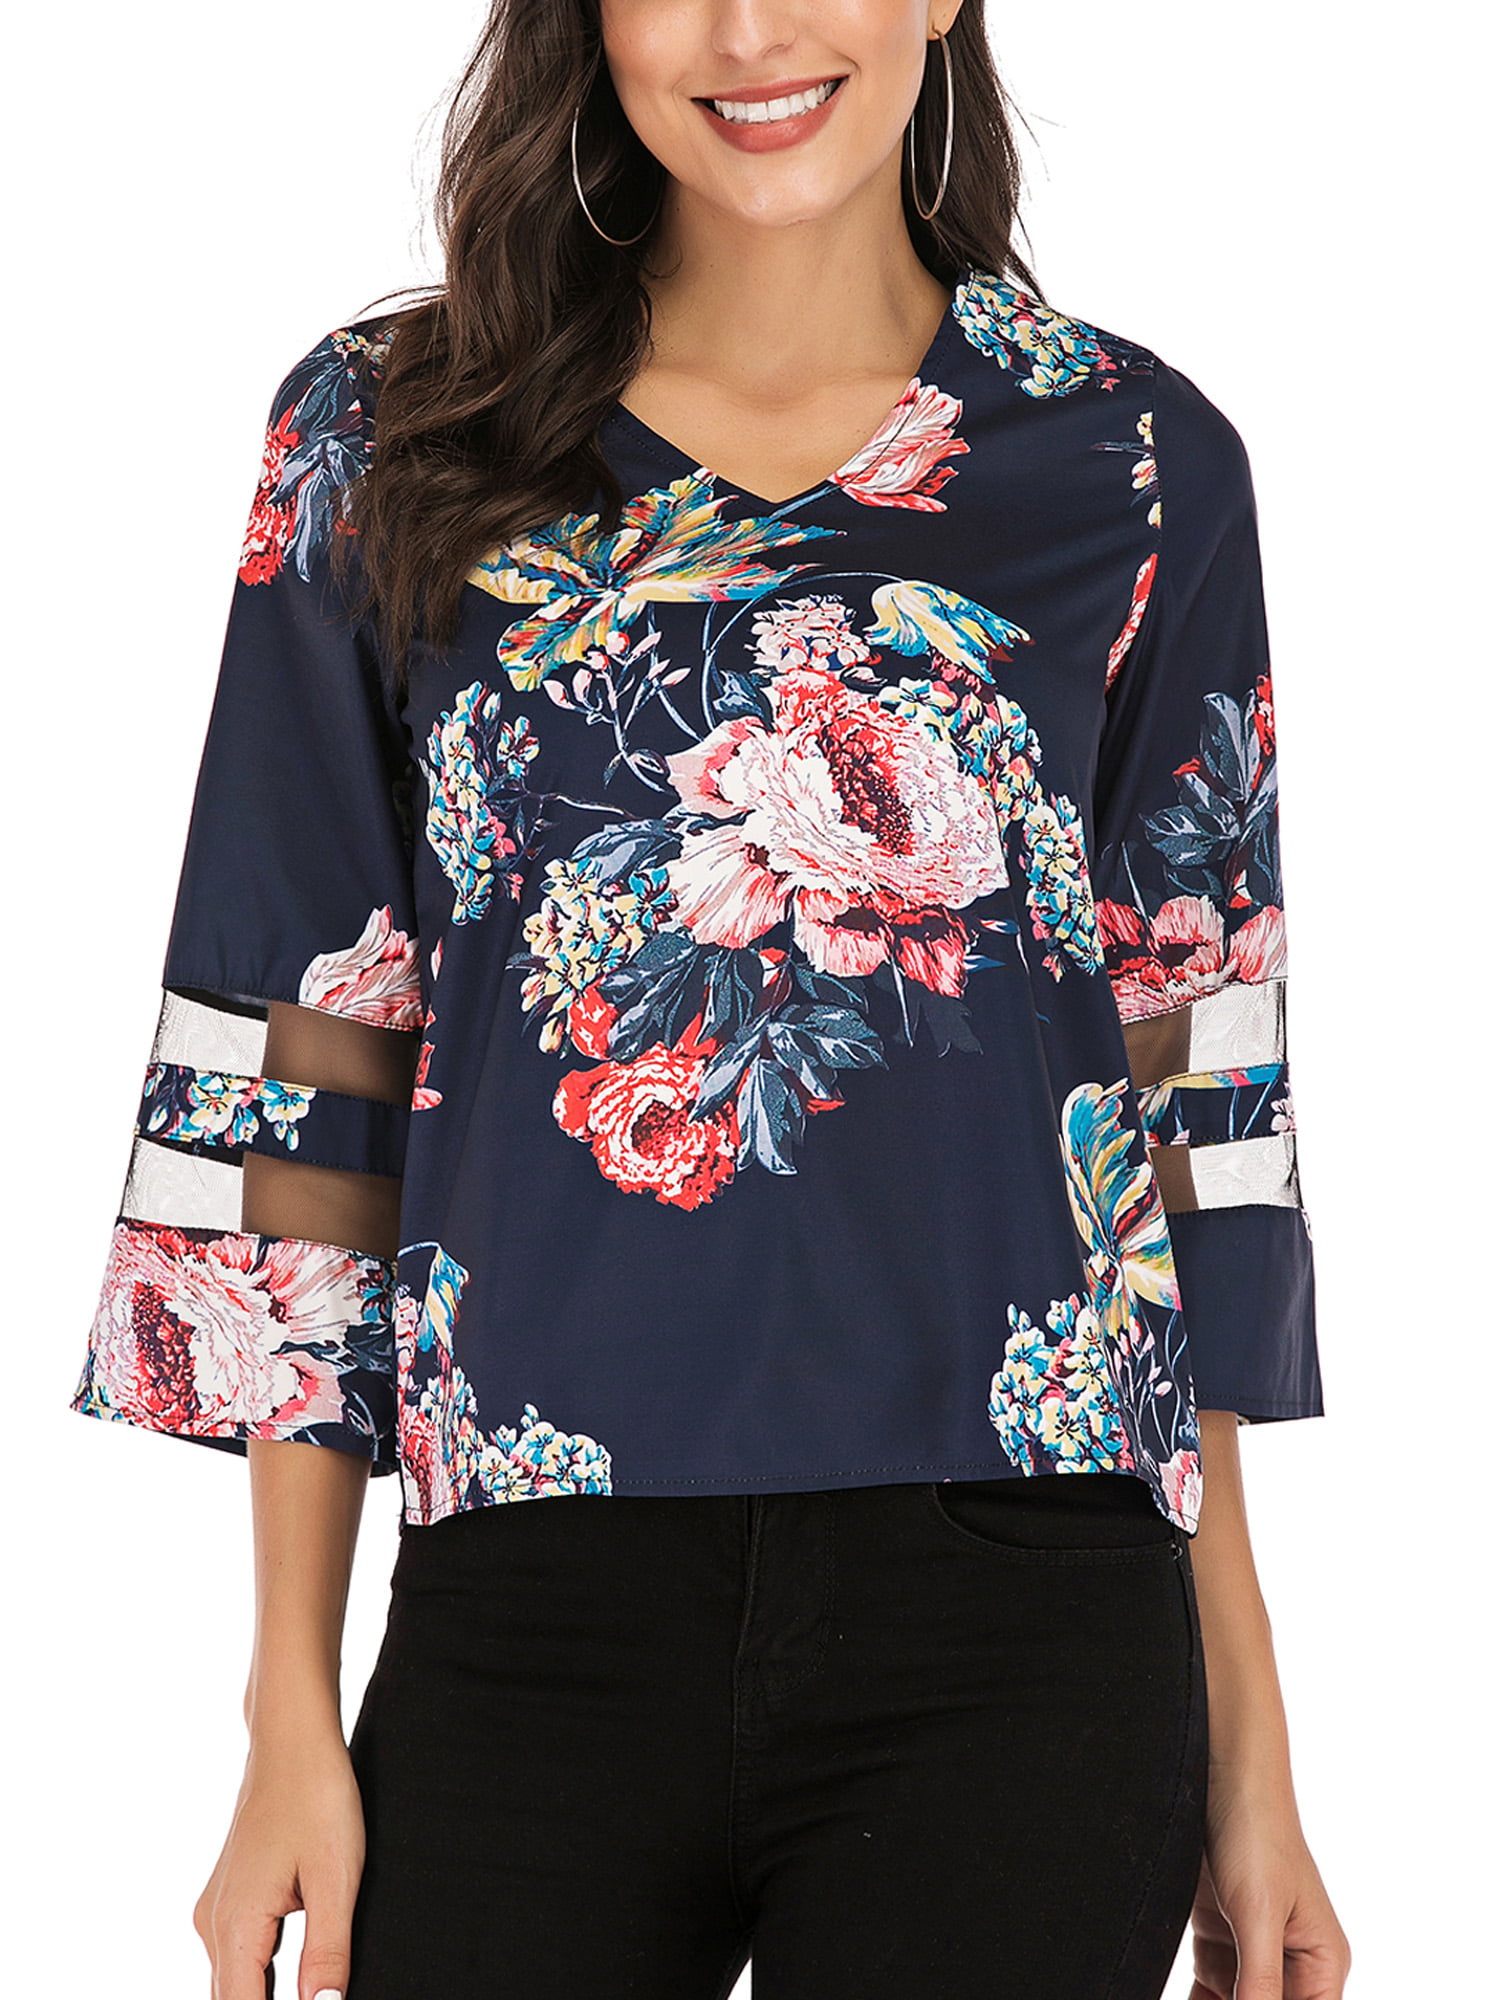 Abollria Womens V Neck Blouse Floral Print 3/4 Sleeve Loose Casual Top Shirt 